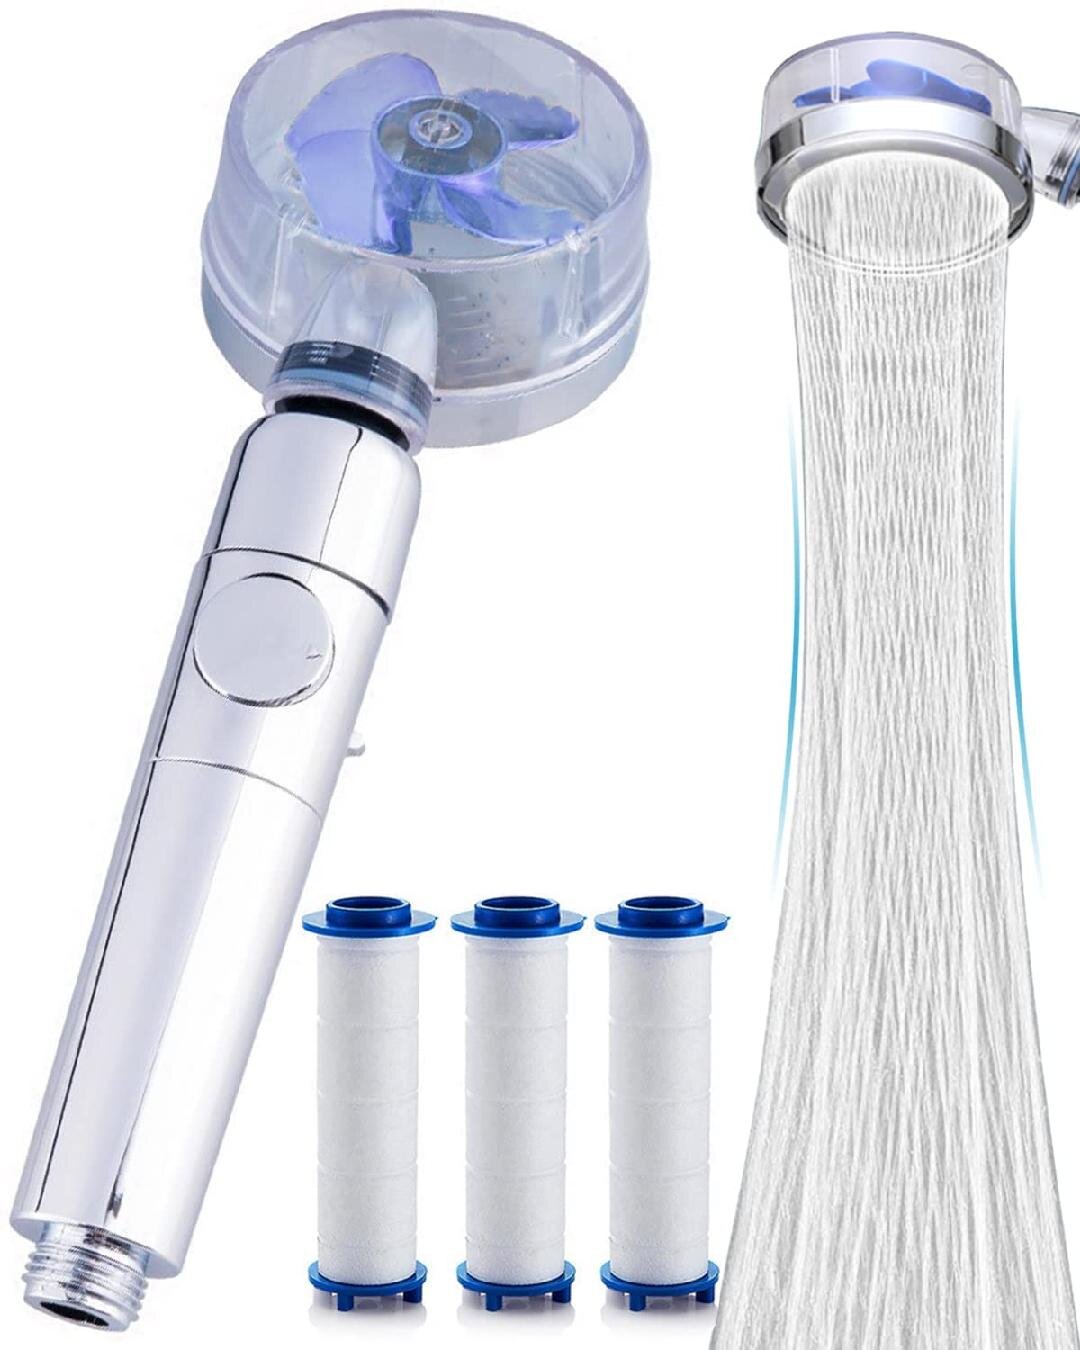 360 Degree Rotating Handheld Turbocharged Pressure Propeller Shower Blue Propeller Driven Turbo Charged Spinning Shower Head with Filter and Pause Switch 